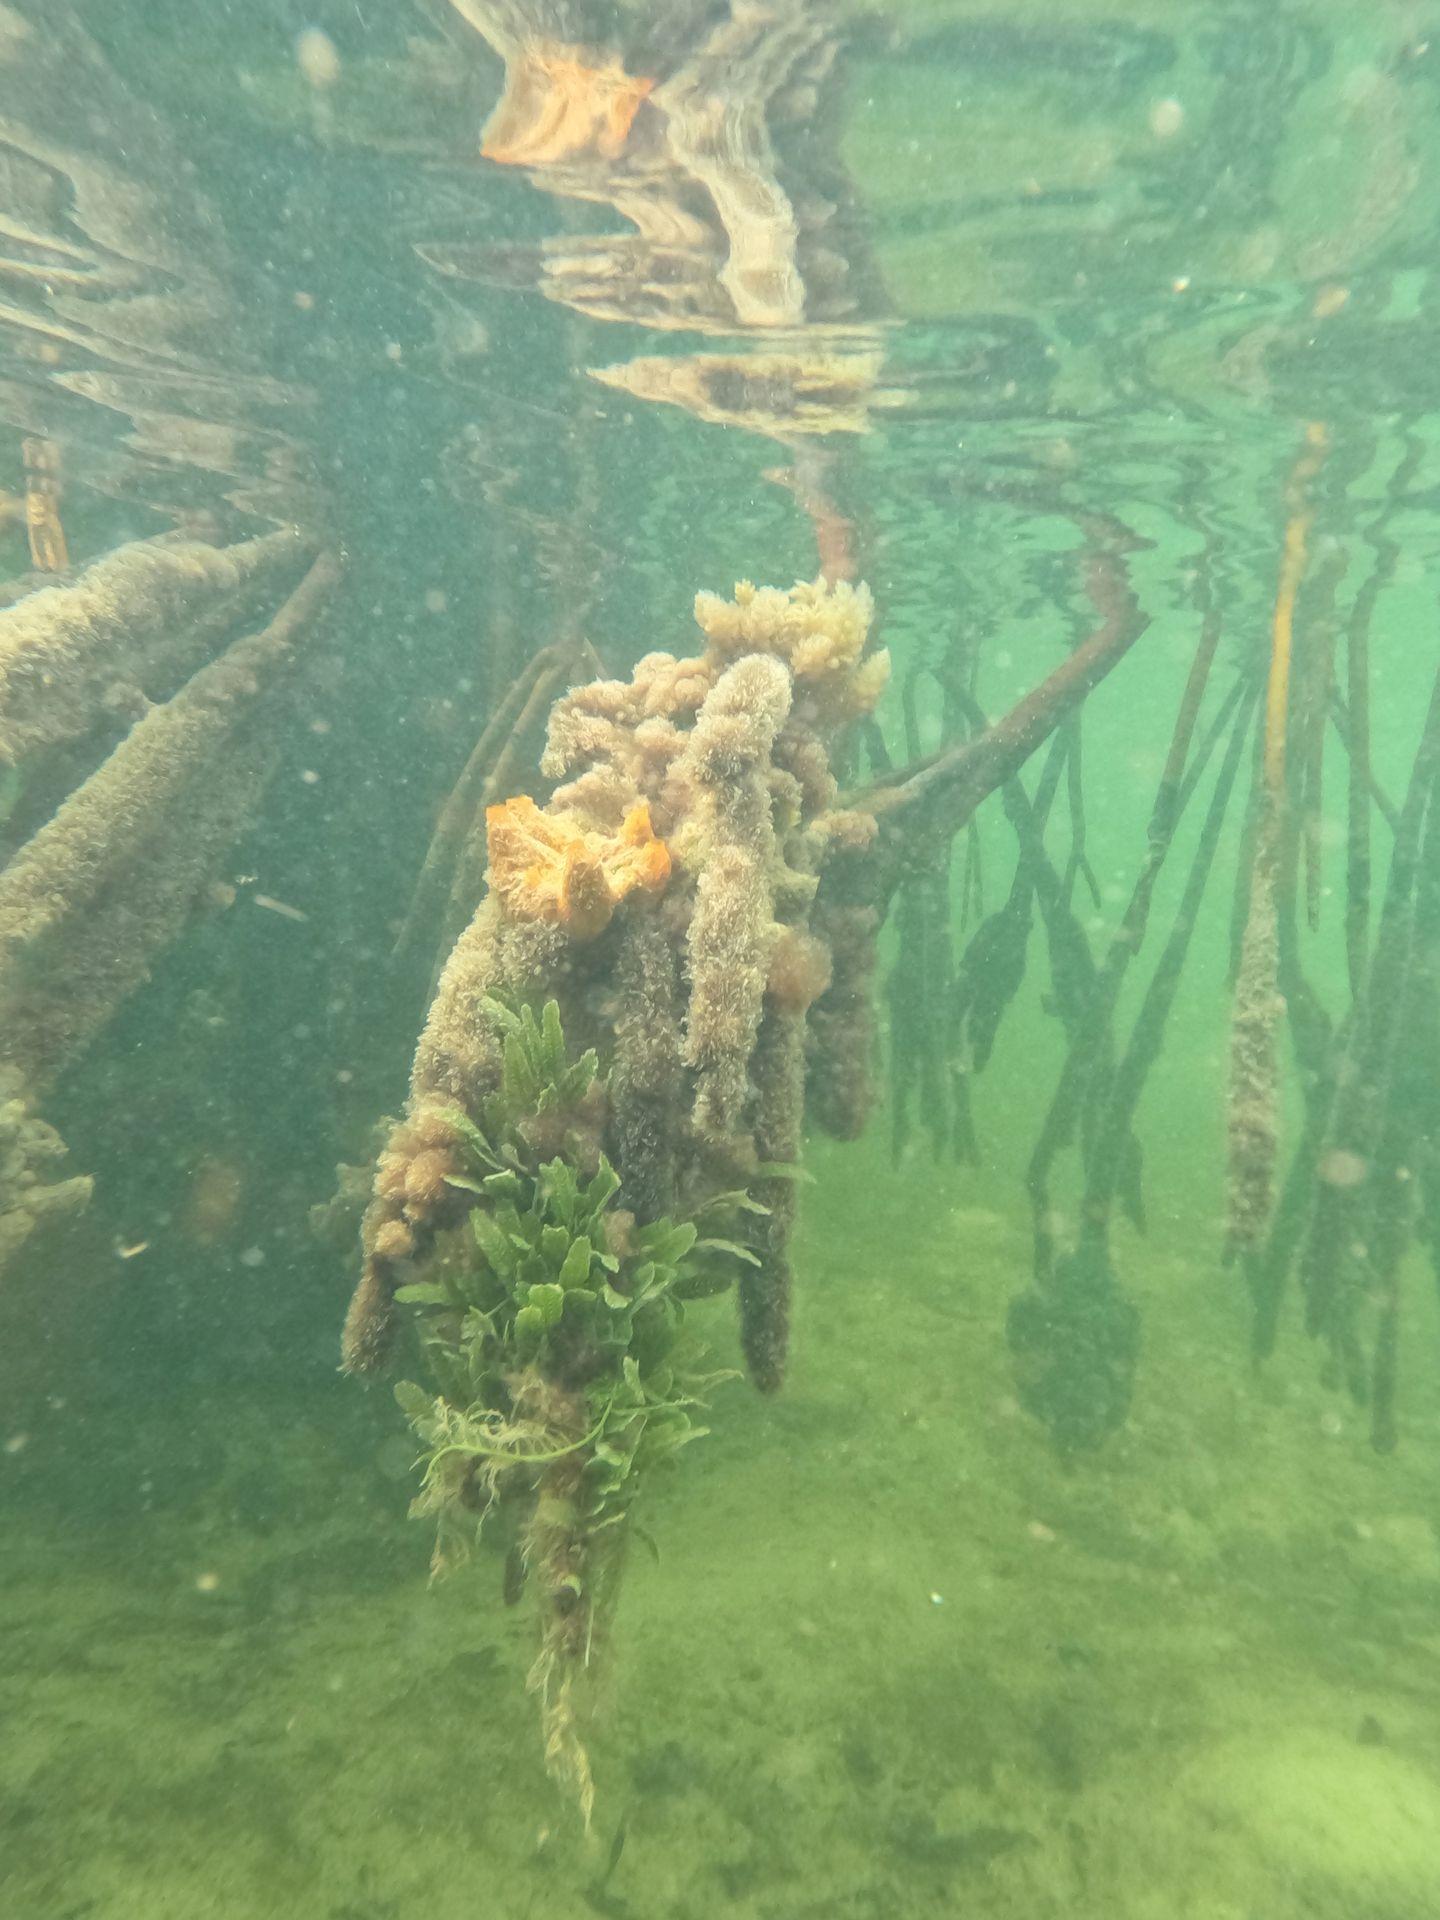 An underwater photo of a mangrove root with coral and greenery growing on it